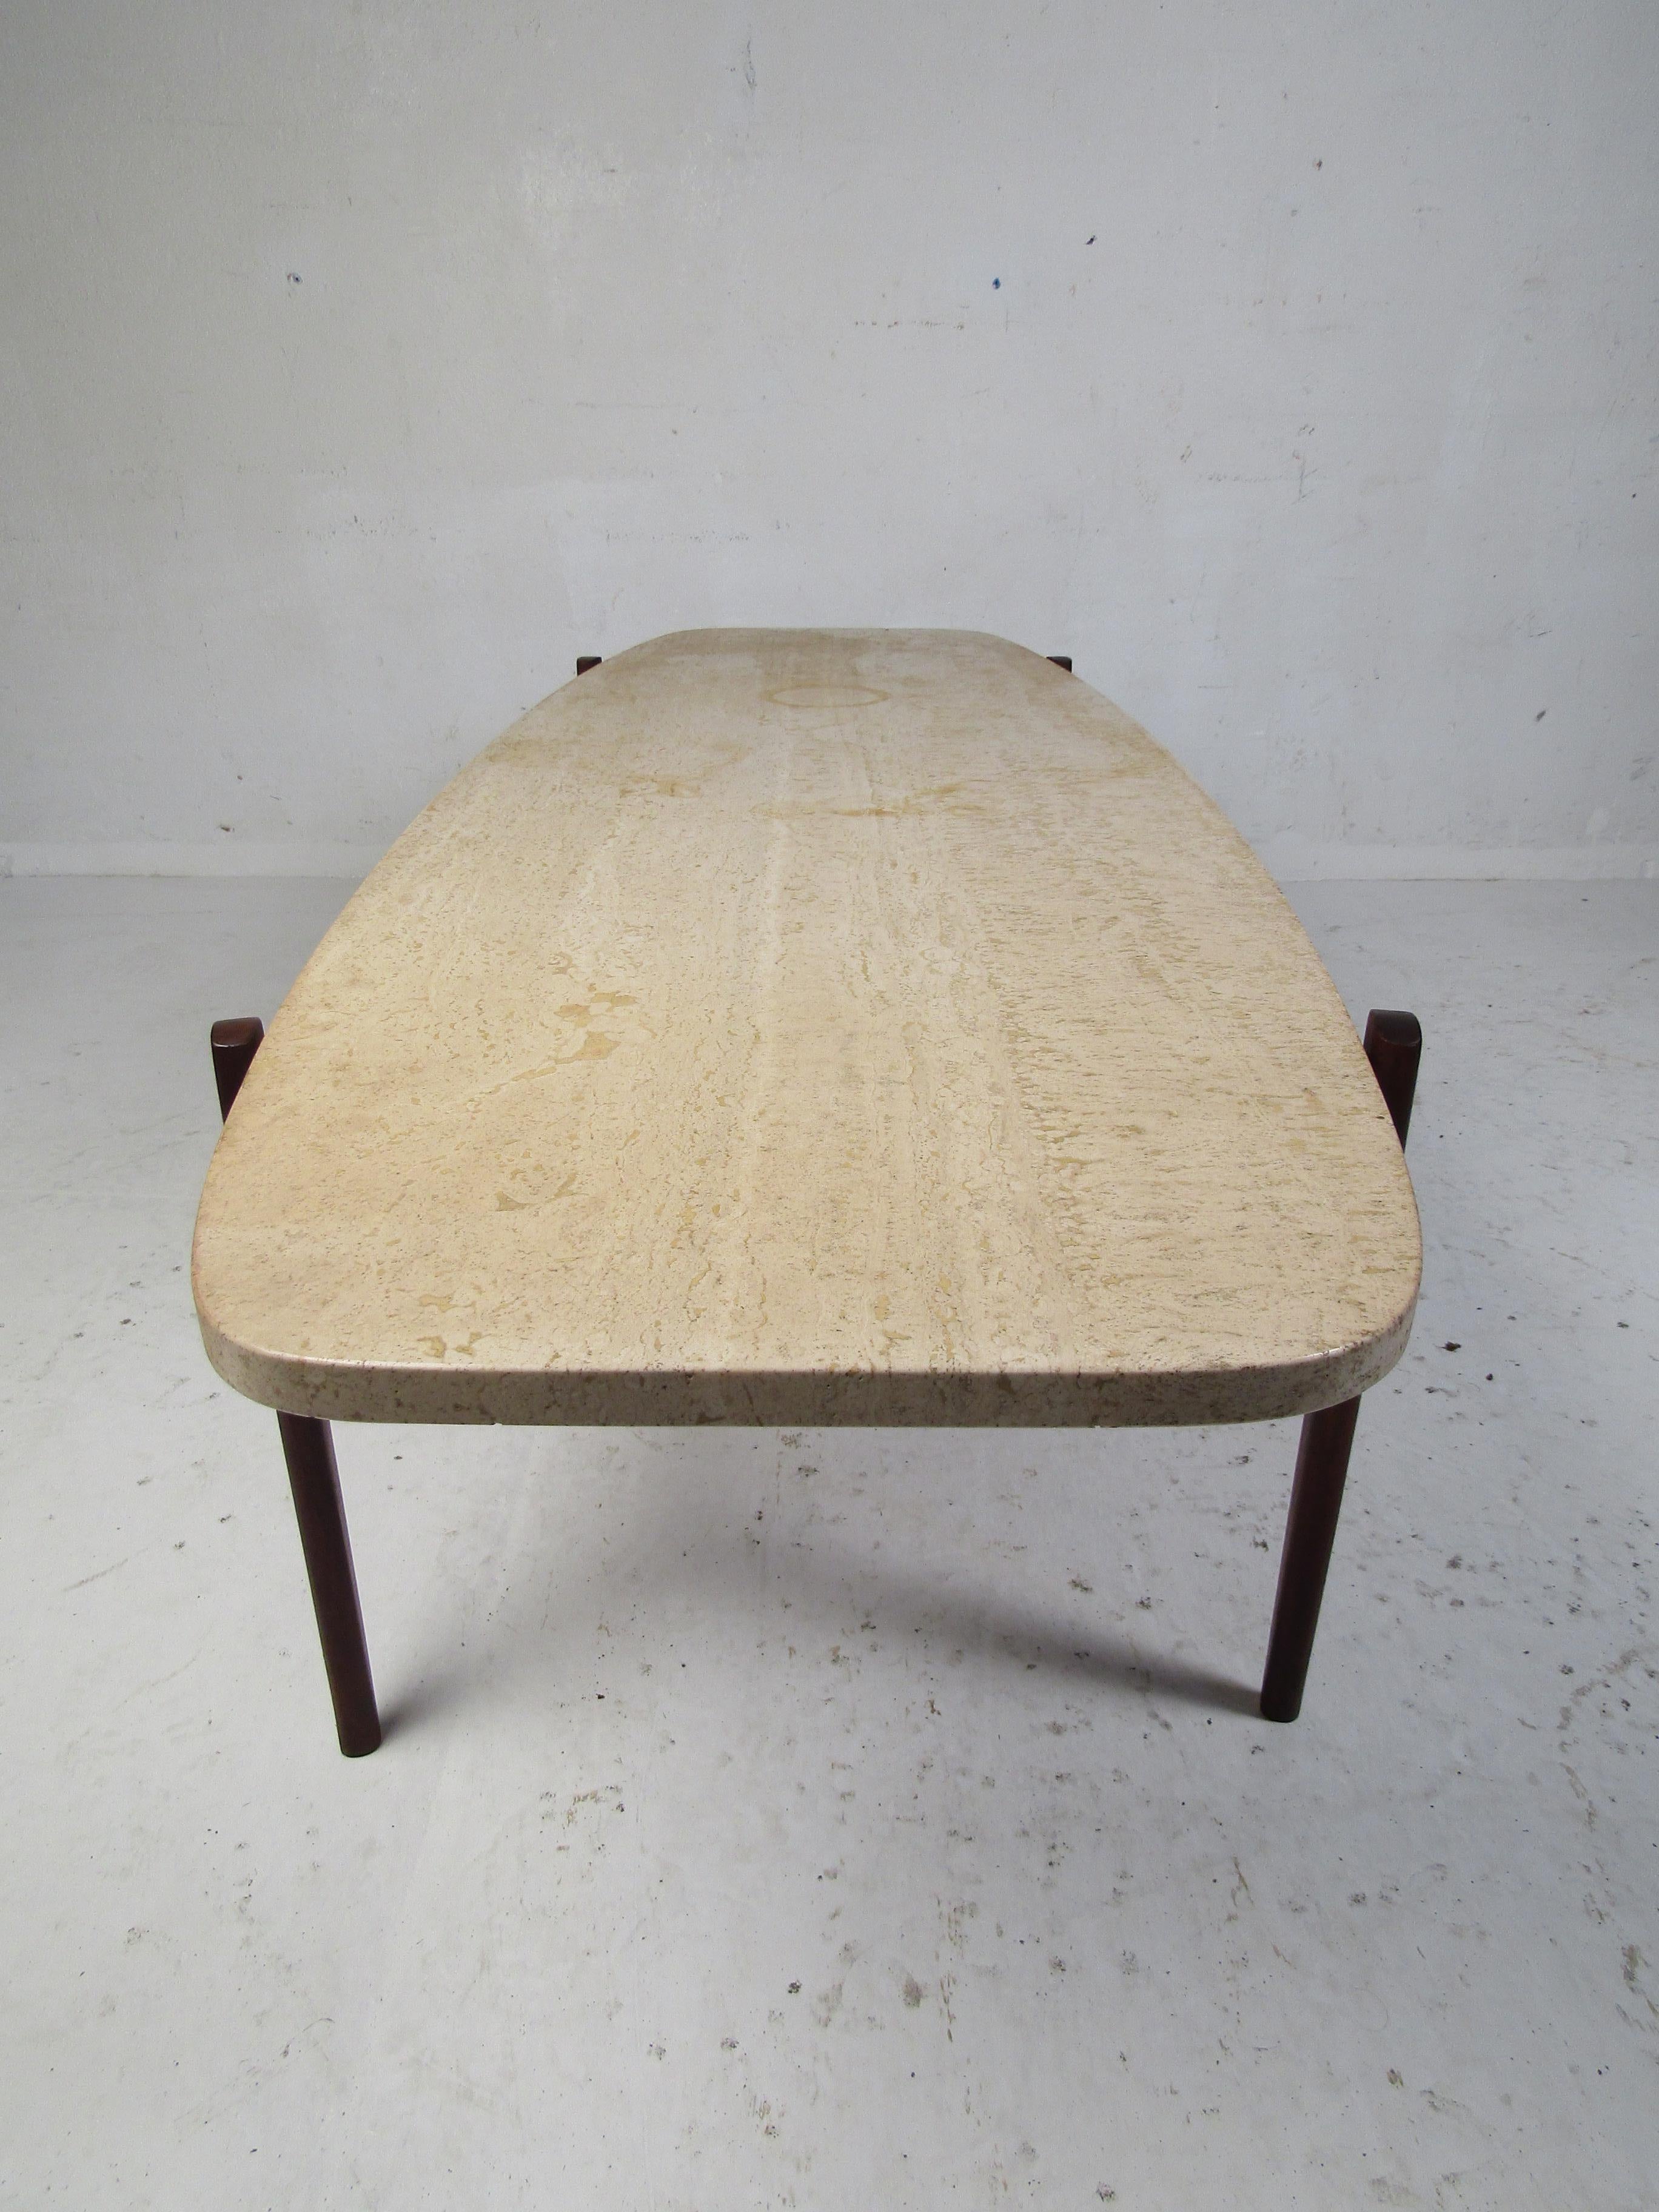 Midcentury Danish Teak Coffee Table In Good Condition For Sale In Brooklyn, NY